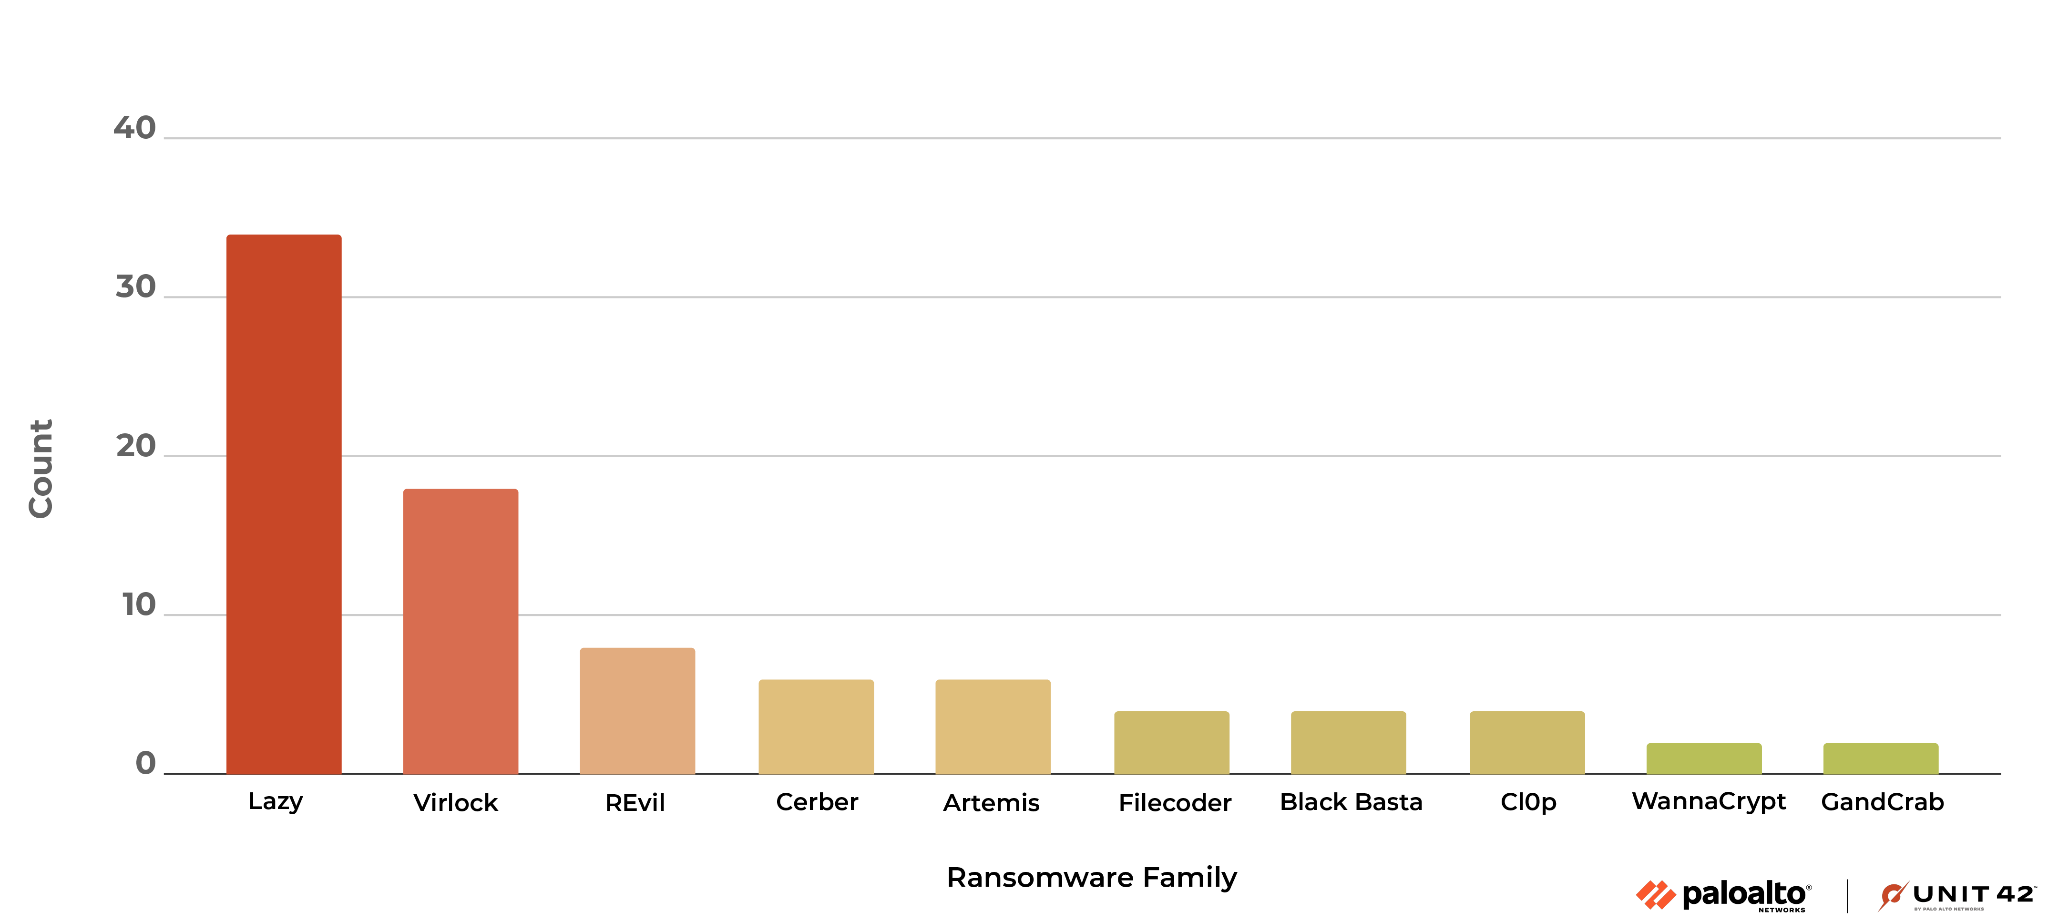 Image 2 is a graph of the top 10 ransomware families by percentage detected. The largest percentage is Lazy at almost 40%.